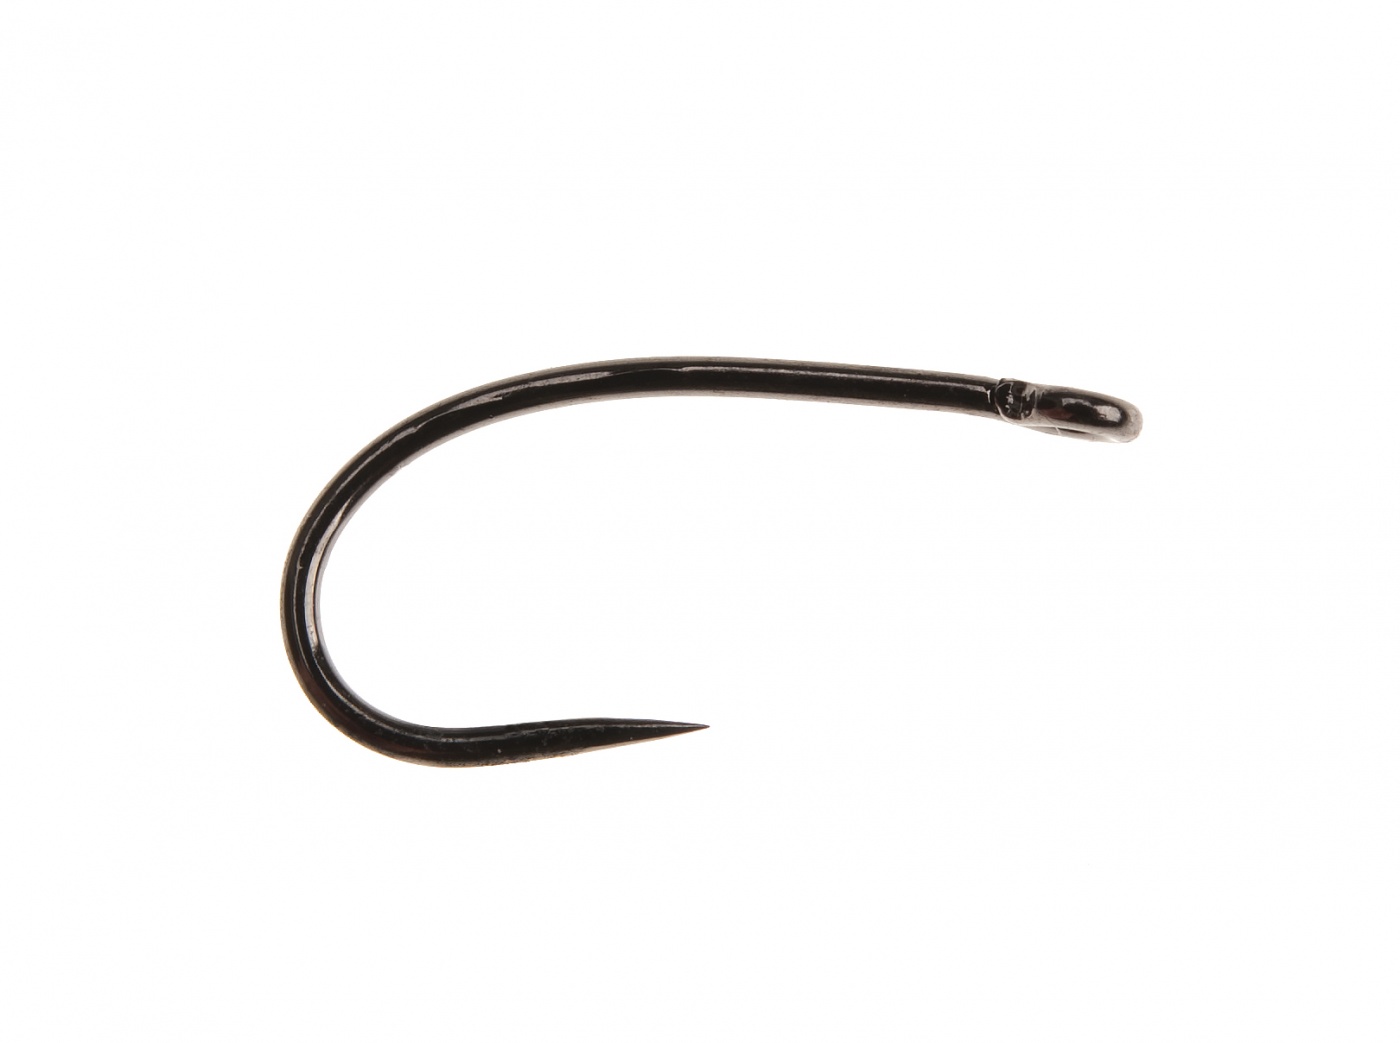 Ahrex Fw511 Curved Dry Hook Barbless #18 Trout Fly Tying Hooks